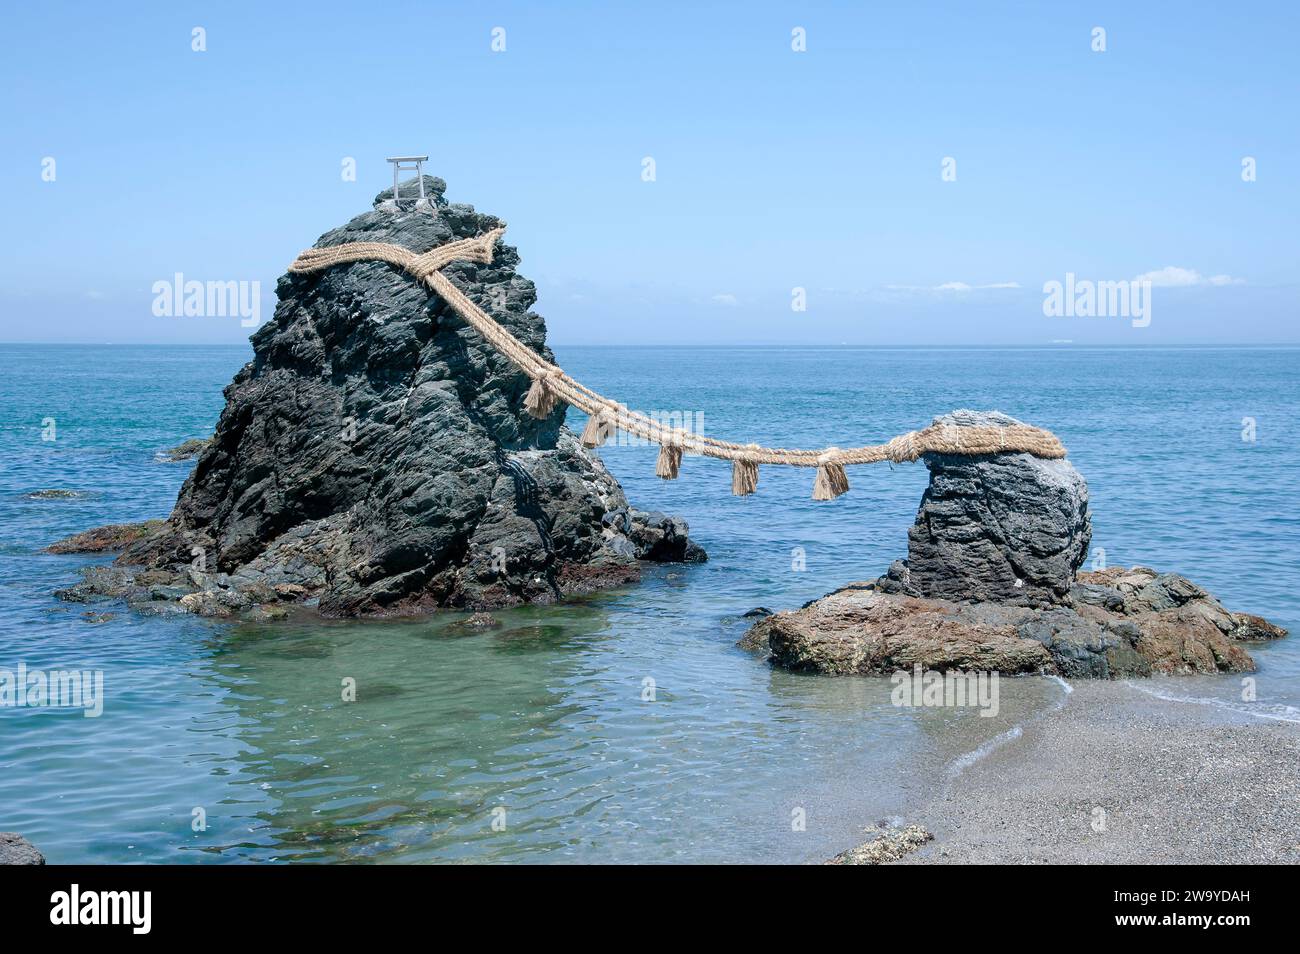 The Meoto Iwa, also known as the wedded rocks, at Futami Okitama Shrine in Ise, Mie Prefecture, Japan. The Meoto Iwa symbolise a married couple. Stock Photo